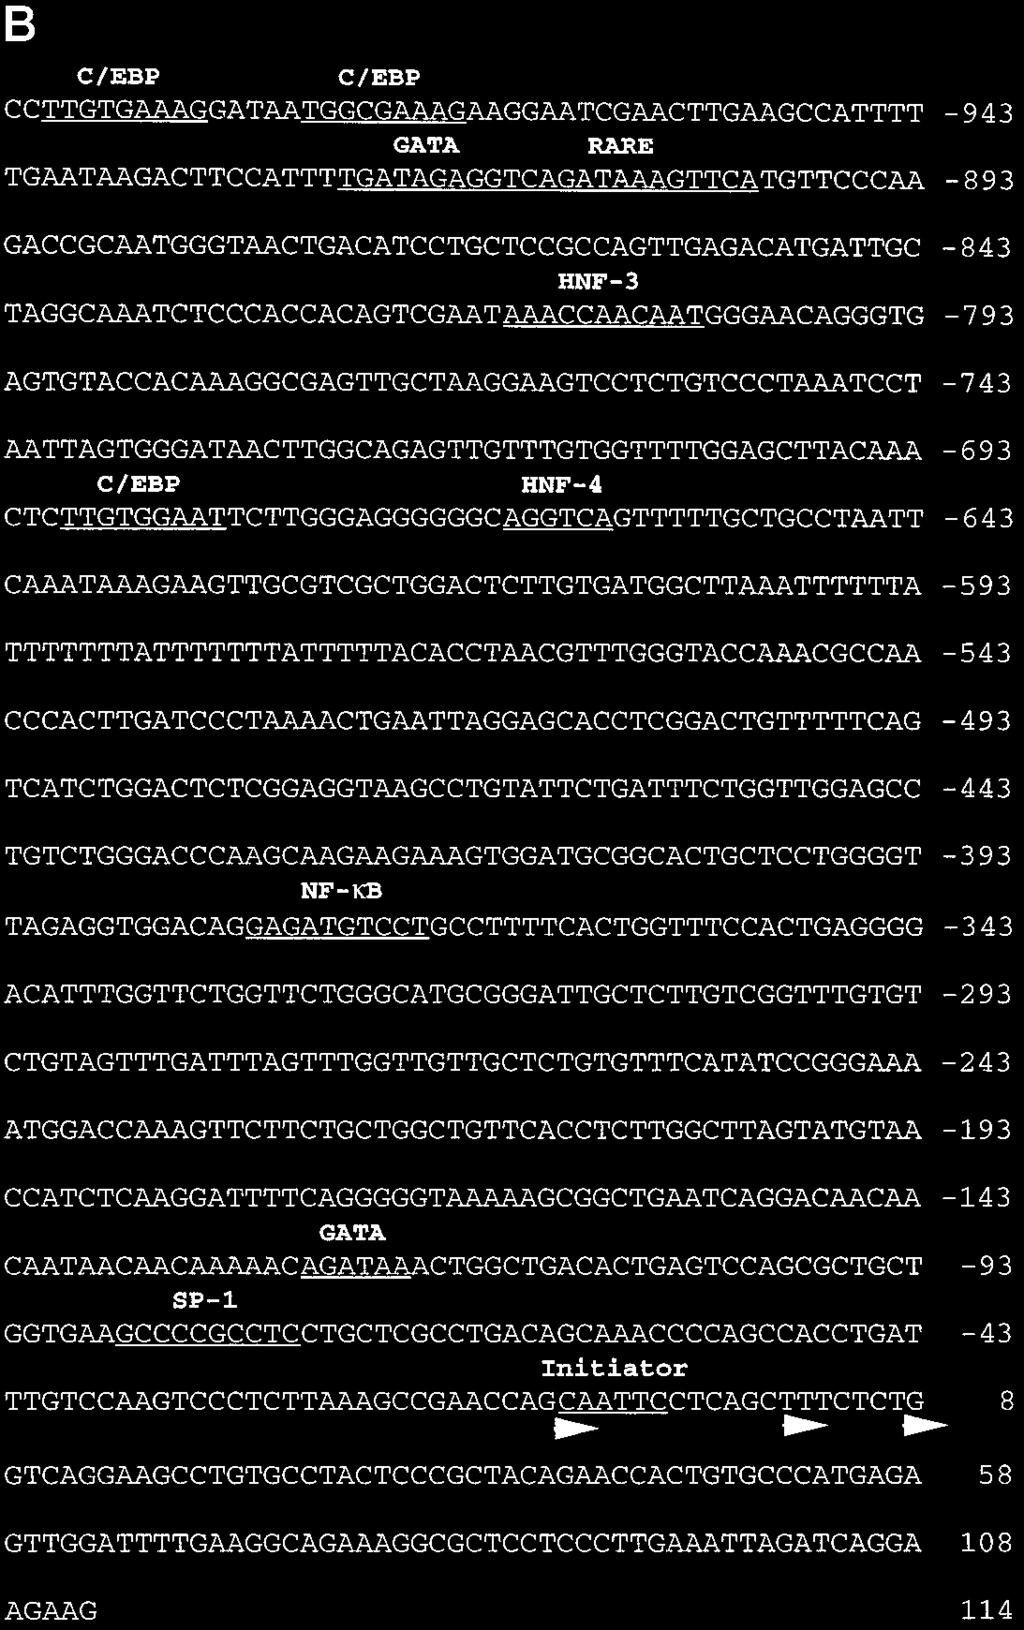 Tissue-specific Expression of Rat APOBEC-1 18065 FIG. 4. Exon 1 is missing from the RE5 APOBEC-1 genomic clone. Southern blot analysis with an oligonucleotide (REP.